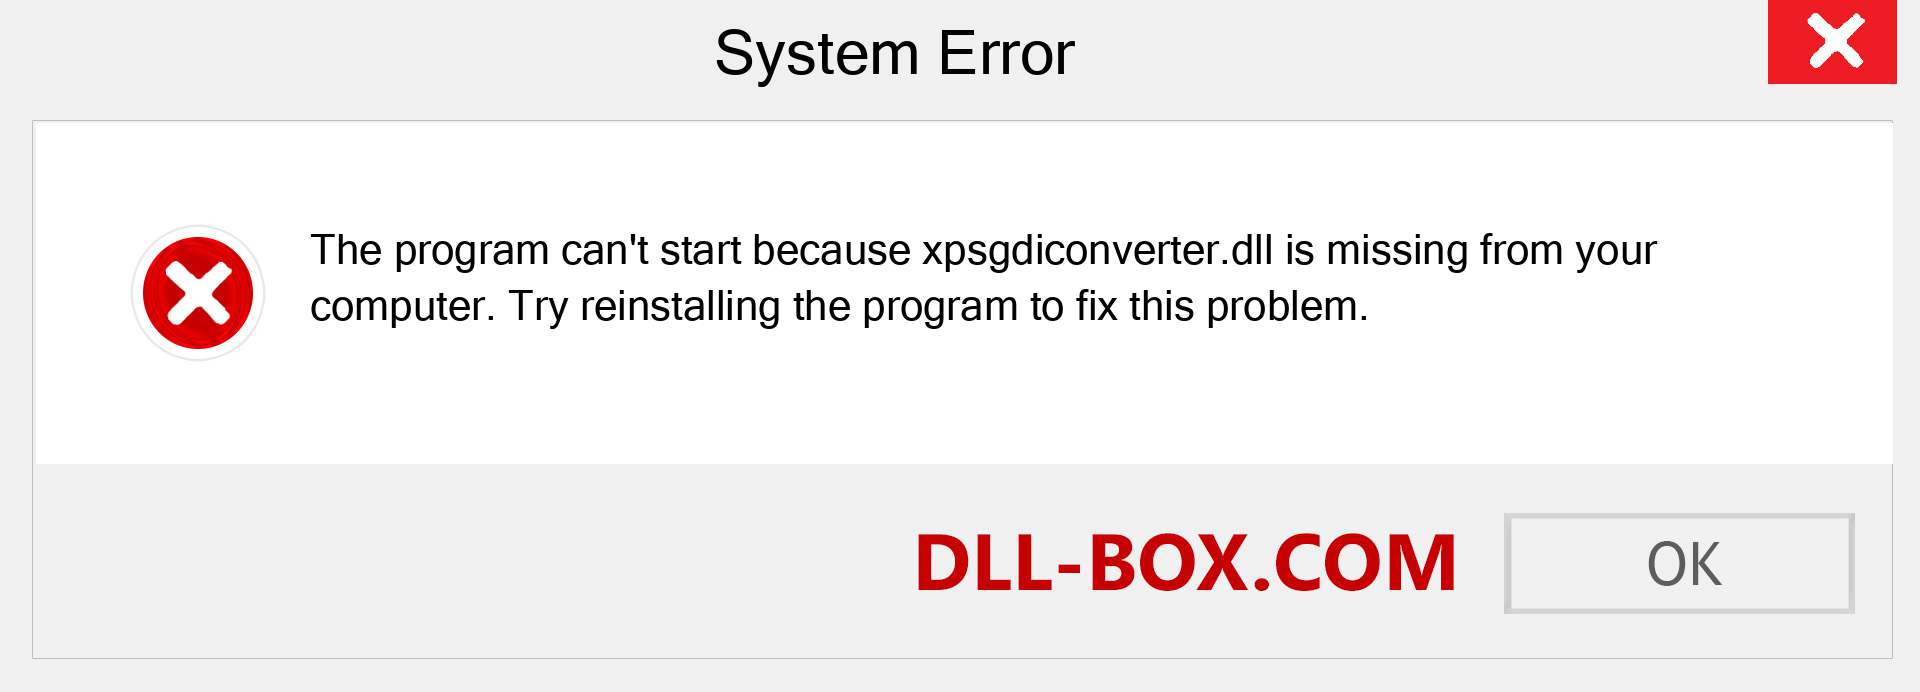  xpsgdiconverter.dll file is missing?. Download for Windows 7, 8, 10 - Fix  xpsgdiconverter dll Missing Error on Windows, photos, images